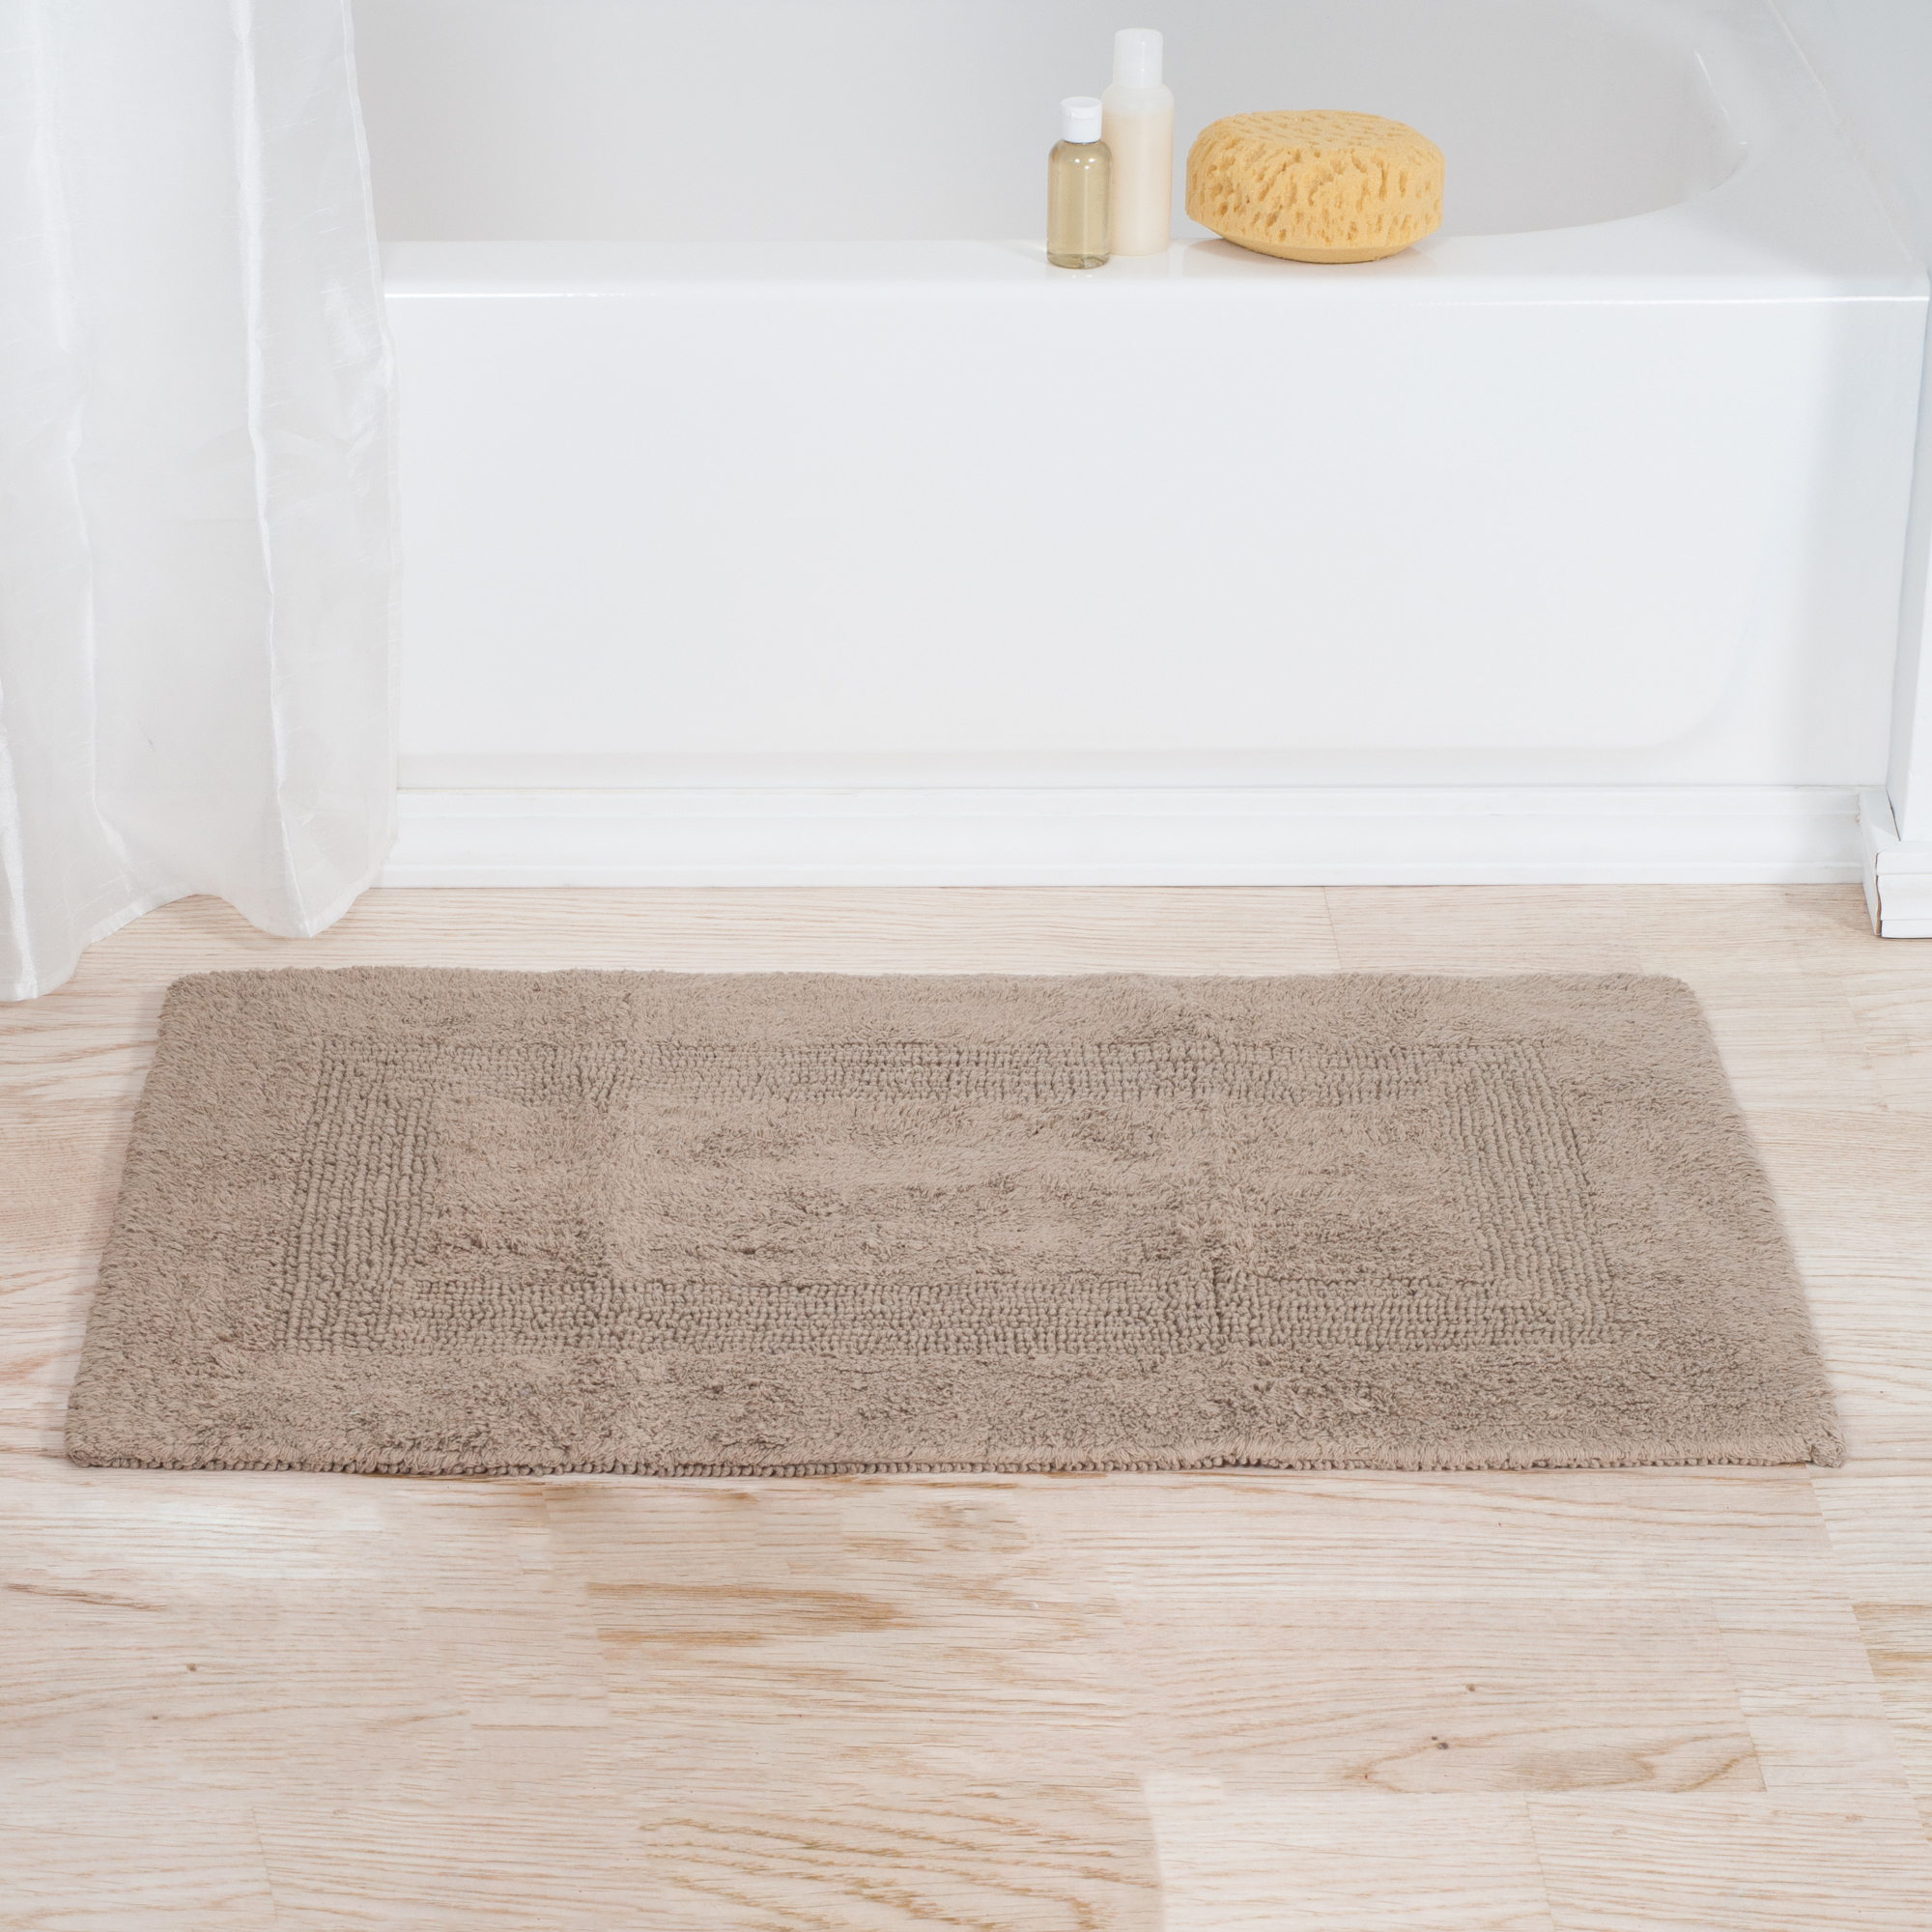 Cotton Reversible Bath Mat- 100 Percent Cotton, Soft And Absorbent Hand Tufted Bath Rug 24 X 40 Inch Taupe